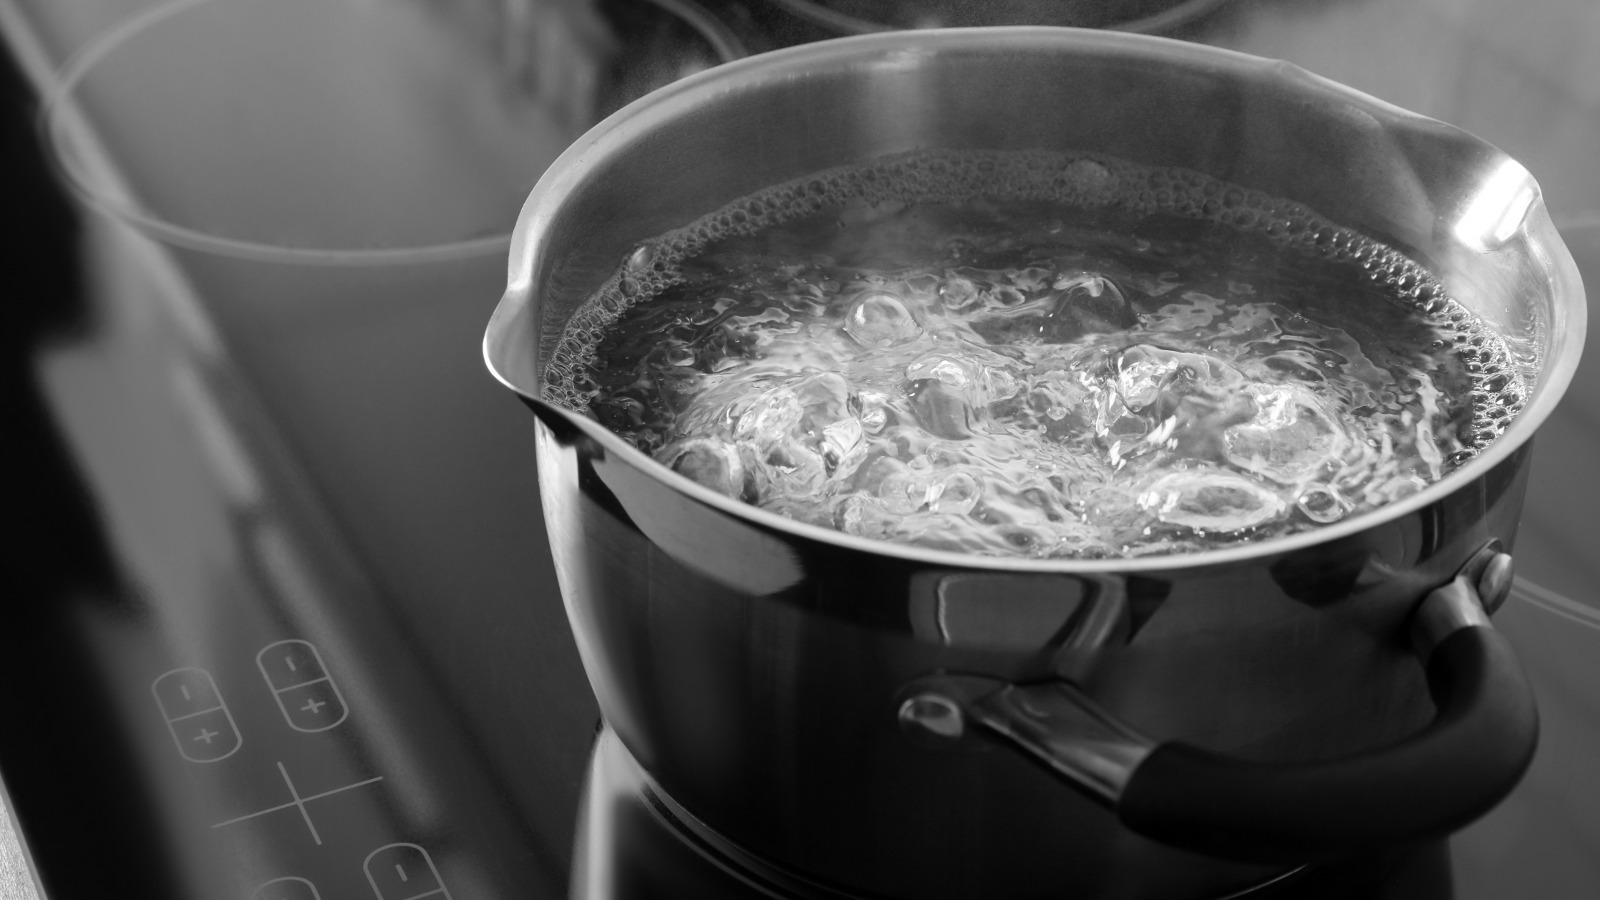 https://www.tastingtable.com/img/gallery/how-long-must-you-boil-water-before-its-safe-to-drink/l-intro-1697750074.jpg